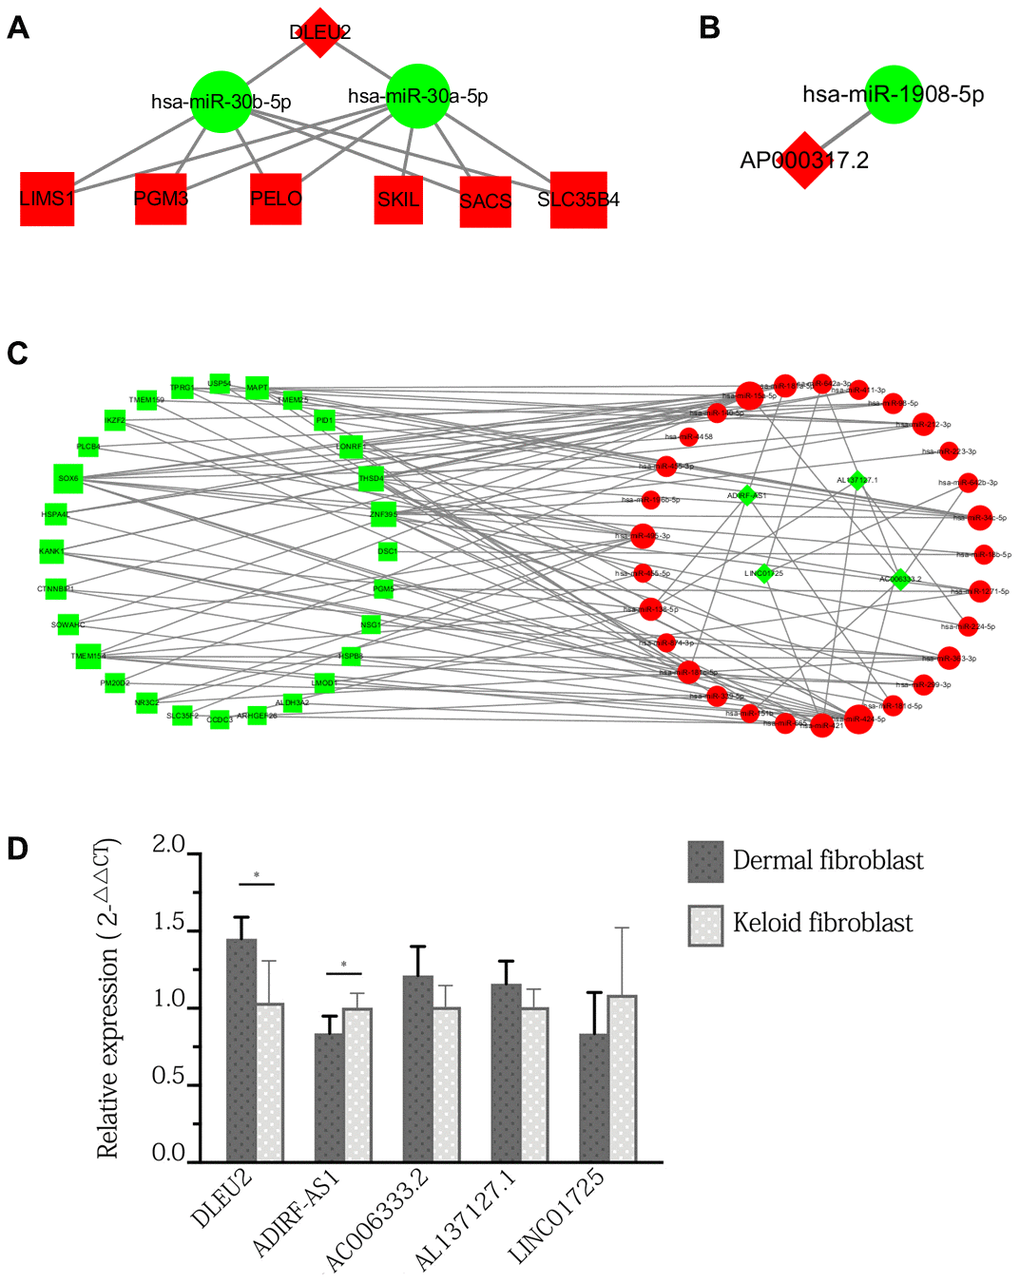 ceRNA sub-network of specific lncRNAs expressed only in keloid-prone individuals and qPCR verification of DElncRNAs in keloid and normal fibroblasts. (A) Sub-network of DLEU2. (B) Sub-network of AP000317.2. (C) Sub-network of downregulated lncRNAs. Green indicates downregulated molecules, red indicates upregulated molecules, diamonds indicate lncRNAs, circles indicate miRNAs, and squares indicate mRNAs. (D) qPCR verification of DElncRNAs in keloid and normal fibroblasts. *p